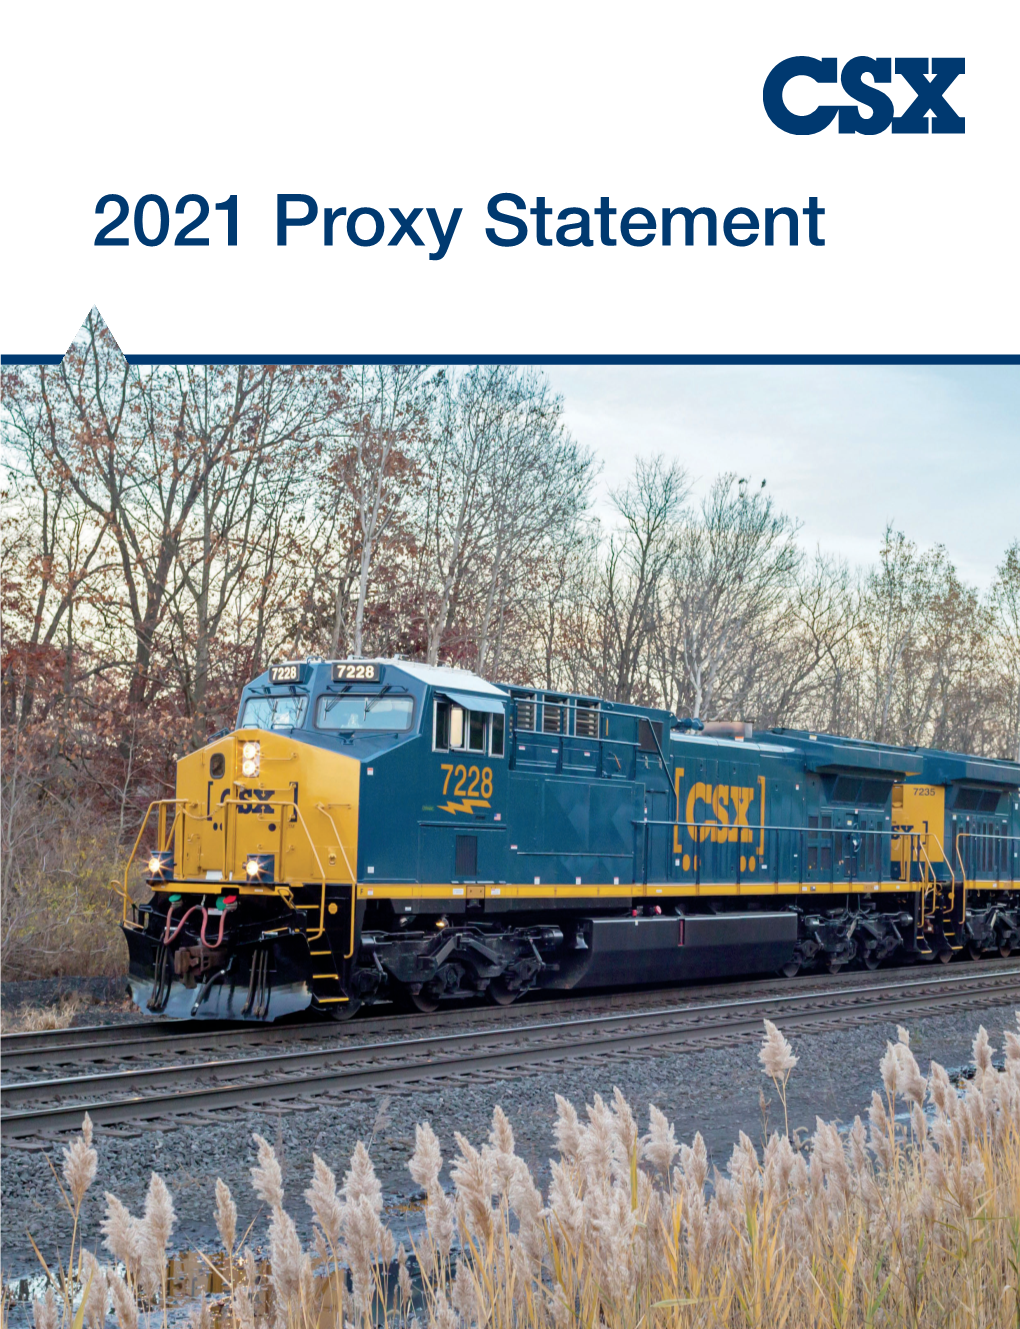 2021 Proxy Statement About CSX and the Value We Create